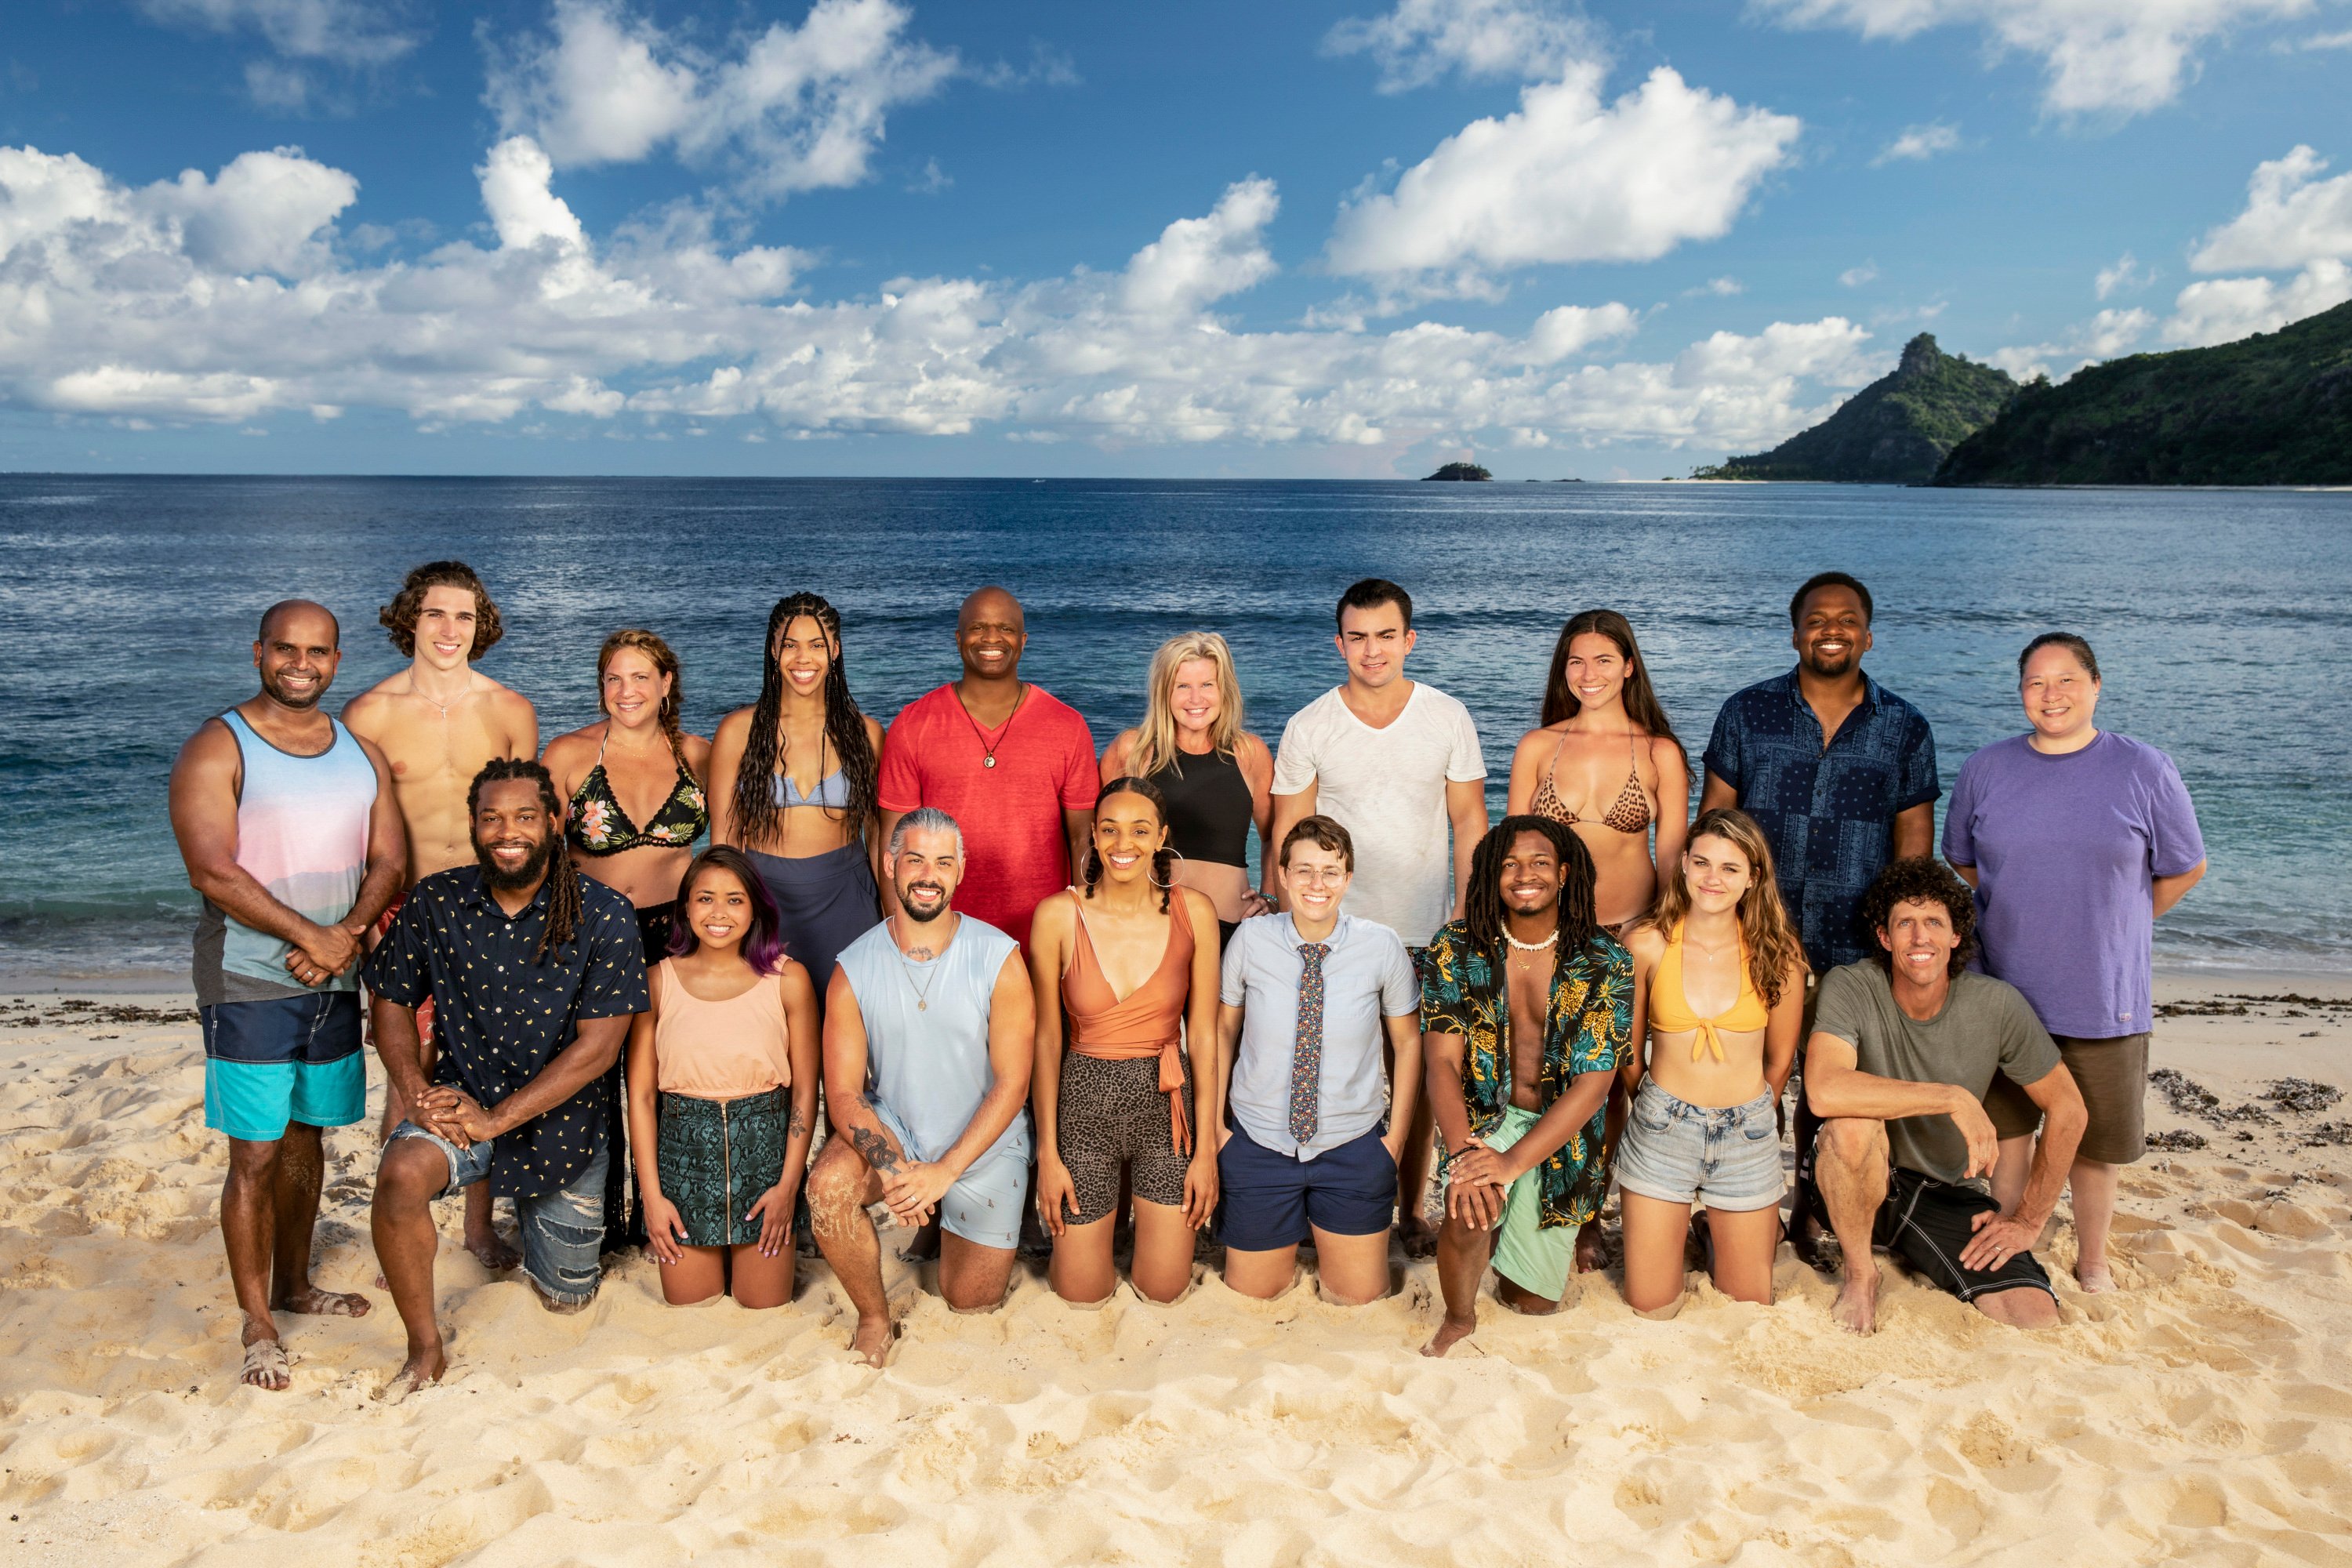 The cast of 'Survivor' season 41 pose for a group picture on the beach.